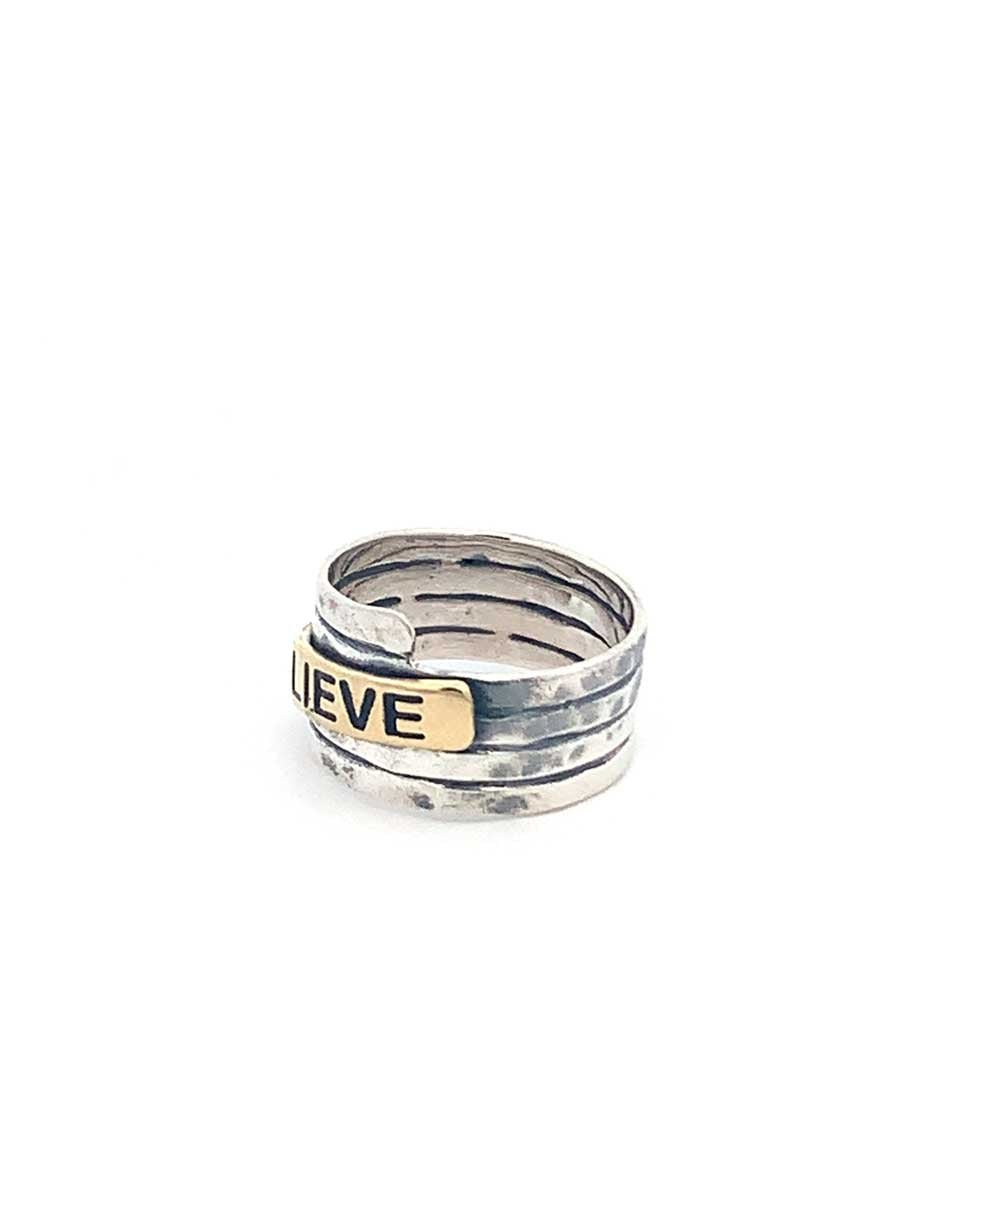 Believe Sterling Silver Hammered Finish Ring - Rings Size 6